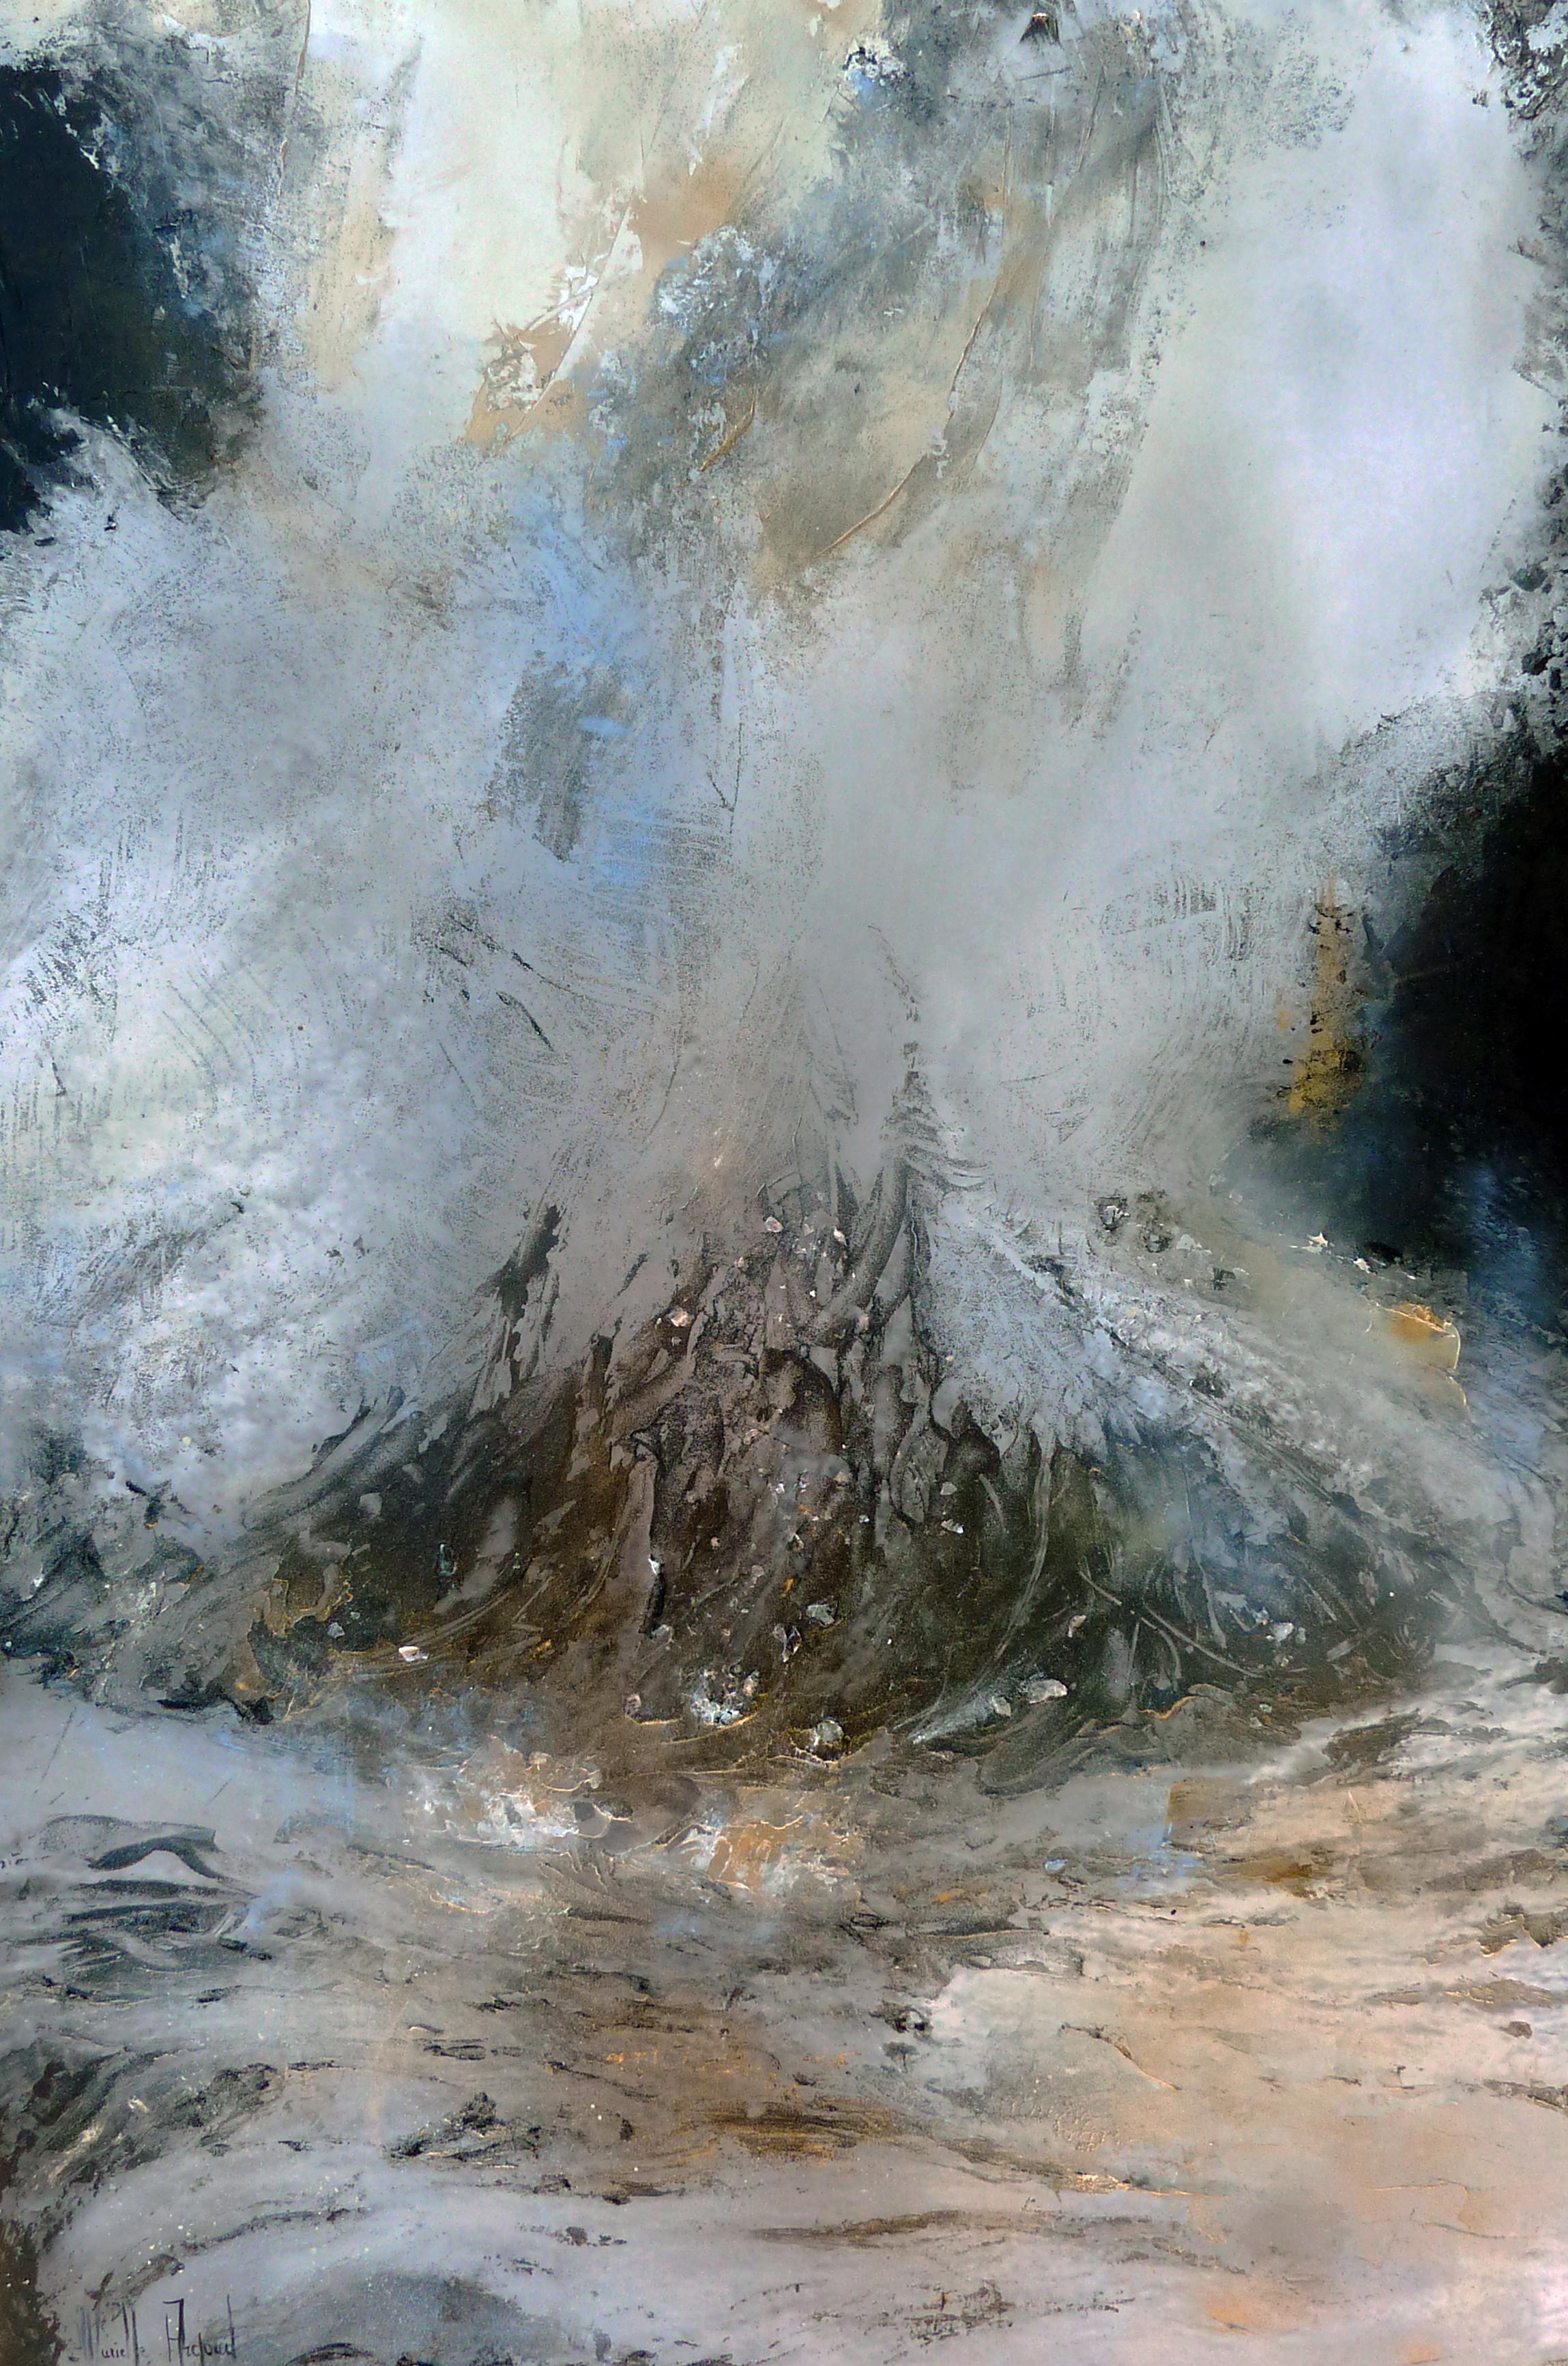 French Contemporary Art by Murielle Argoud - The Human Soul is Like Water